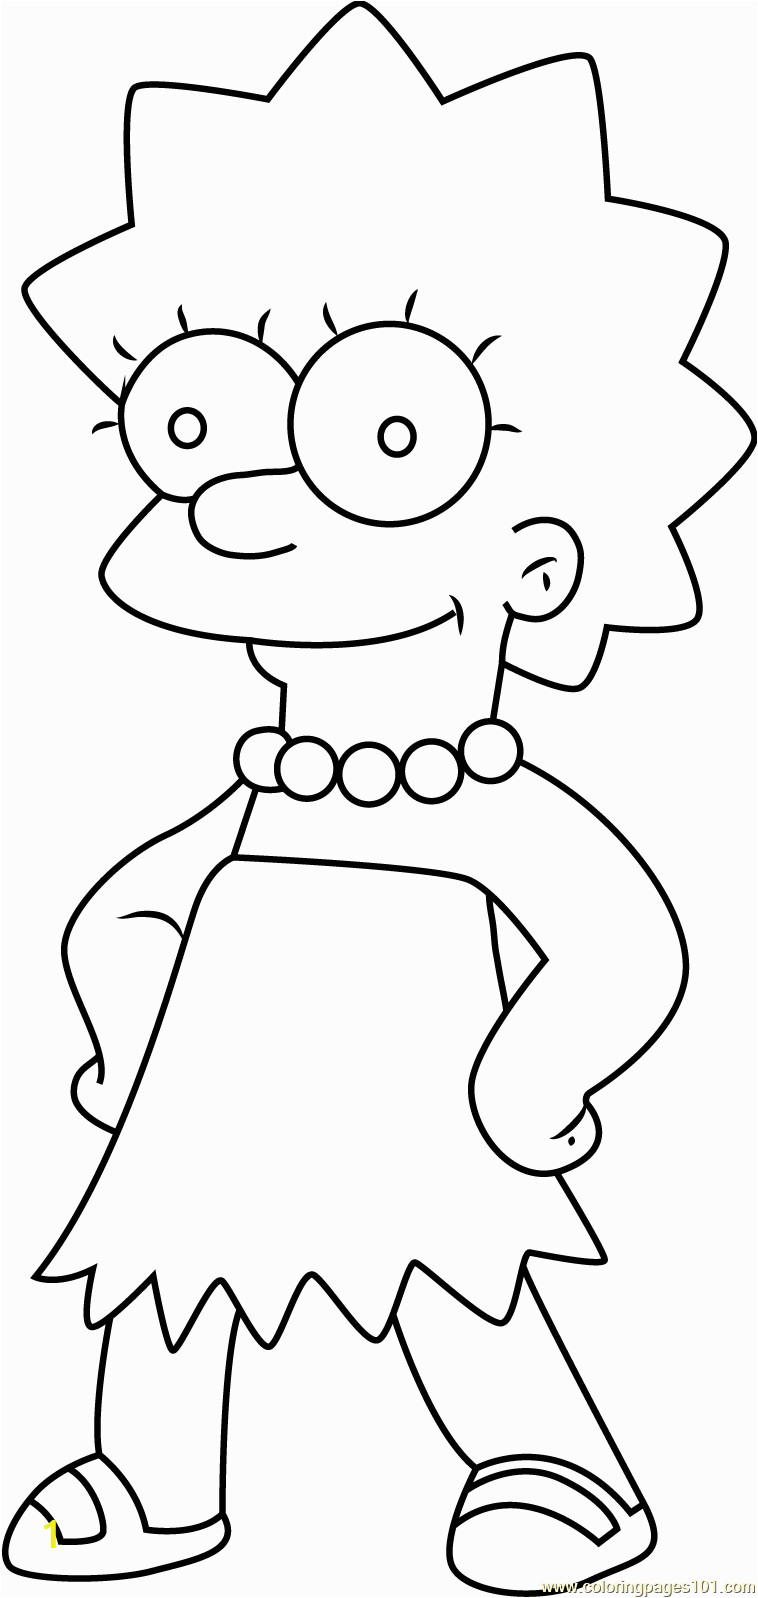 Maggie Simpson Sister Lisa Simpson coloring page